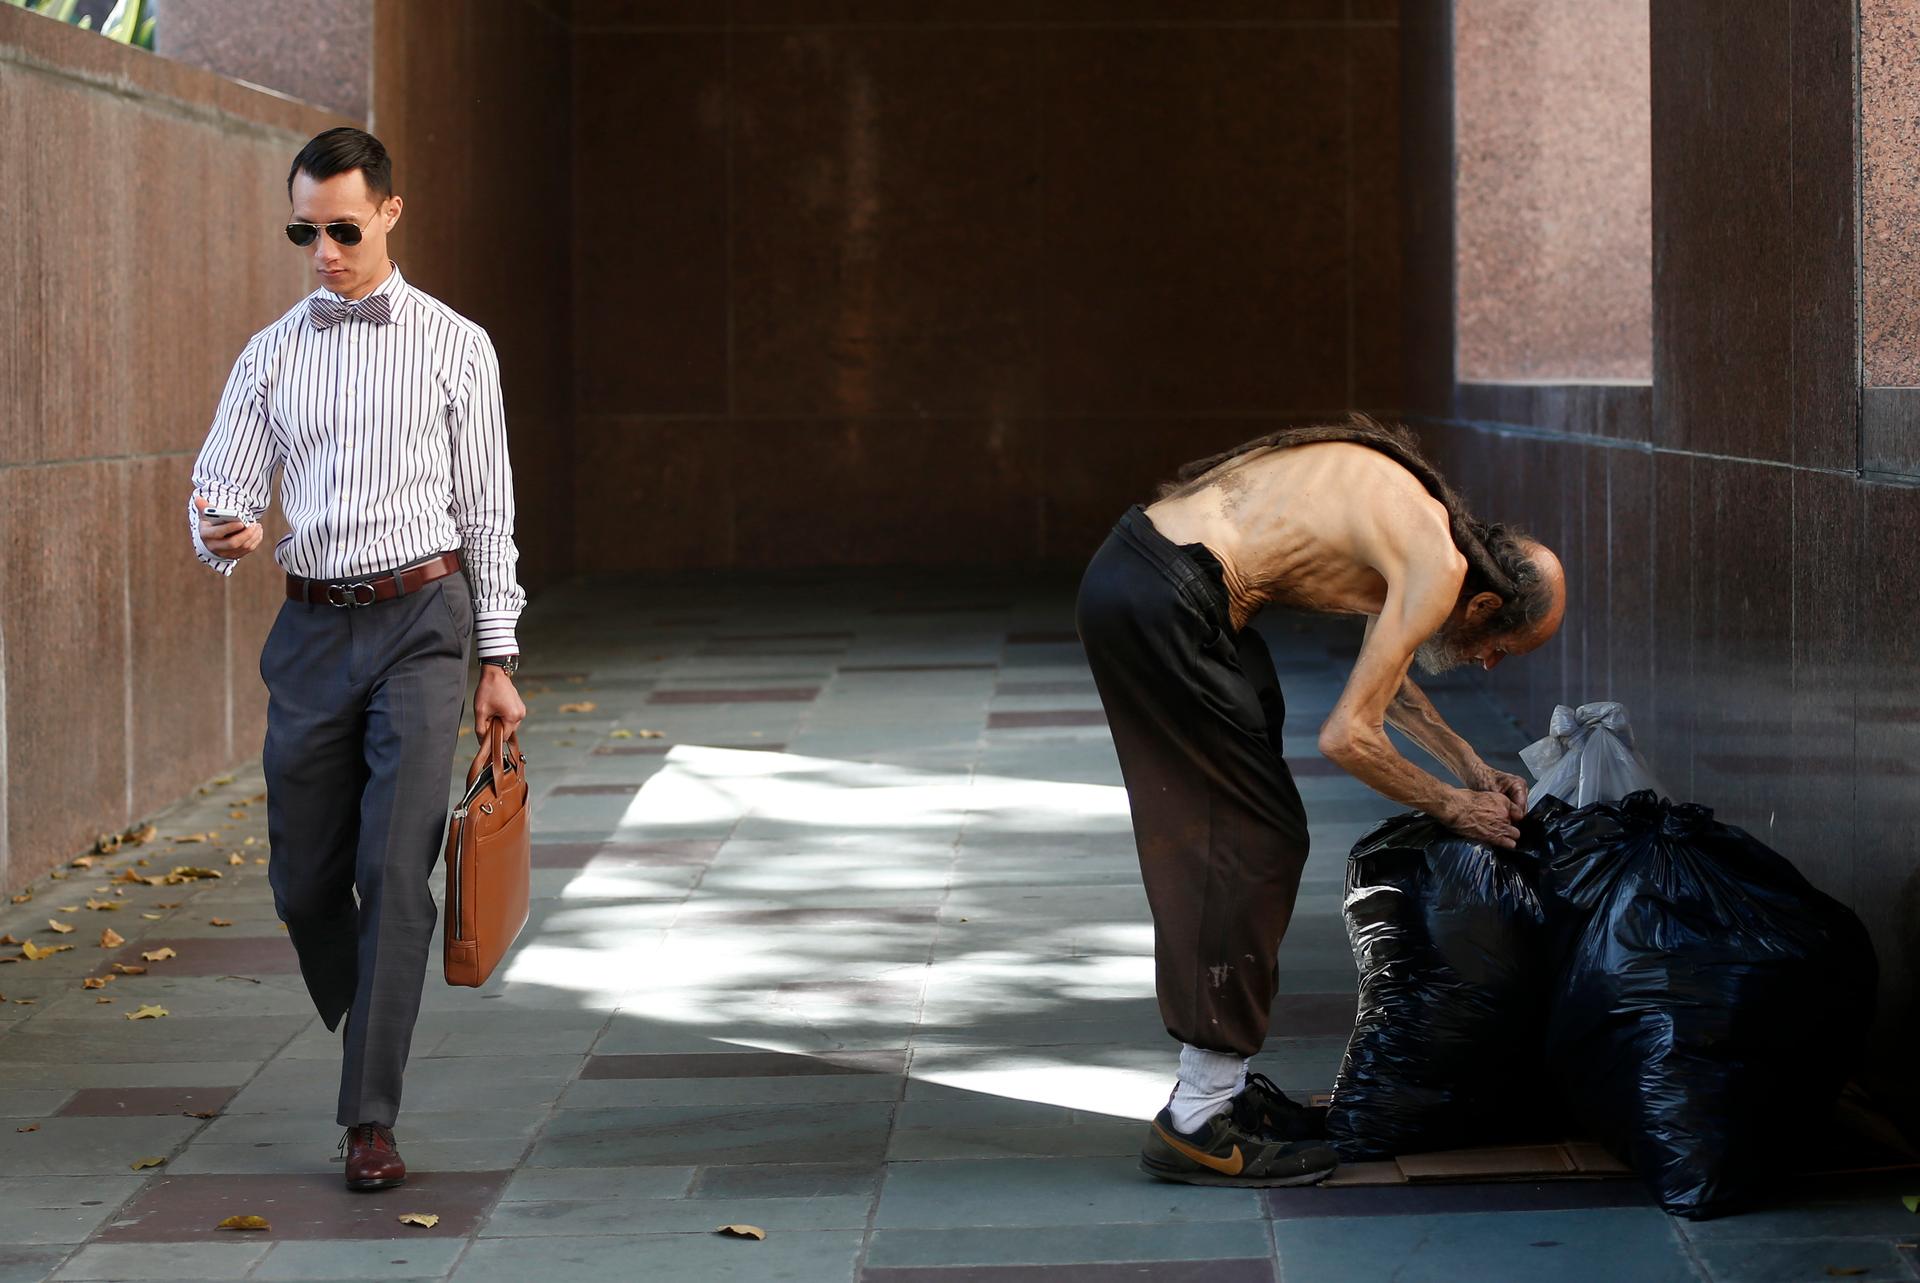 A man in business attire holding a briefcase walks past a shirtless man stooping over plastic bags